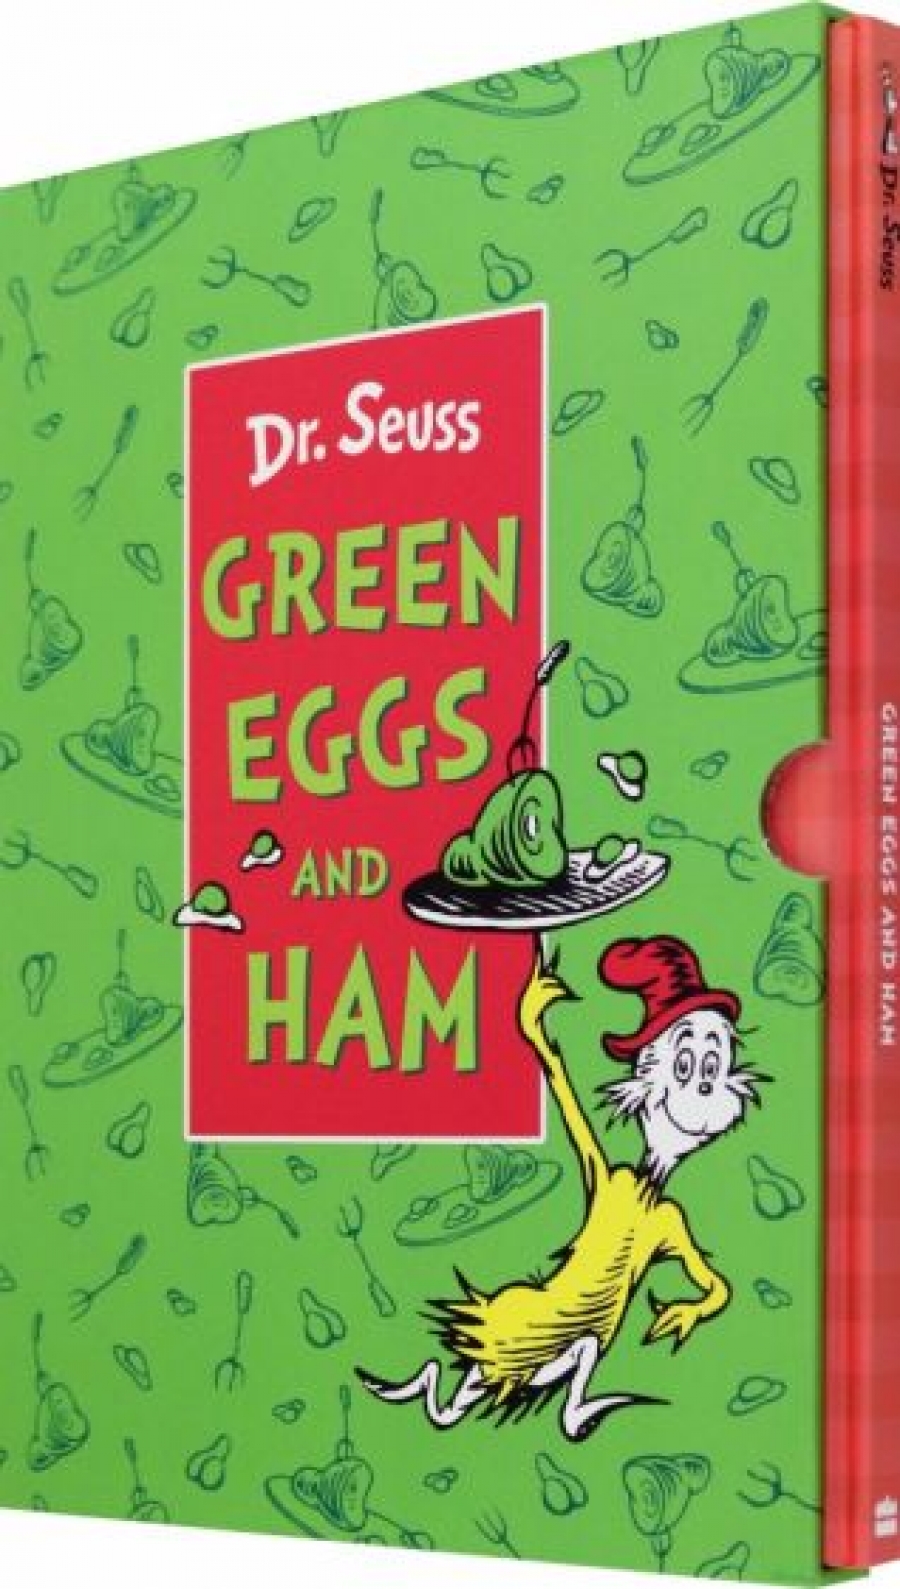 Dr Seuss Green Eggs and Ham. Slipcase Edition 